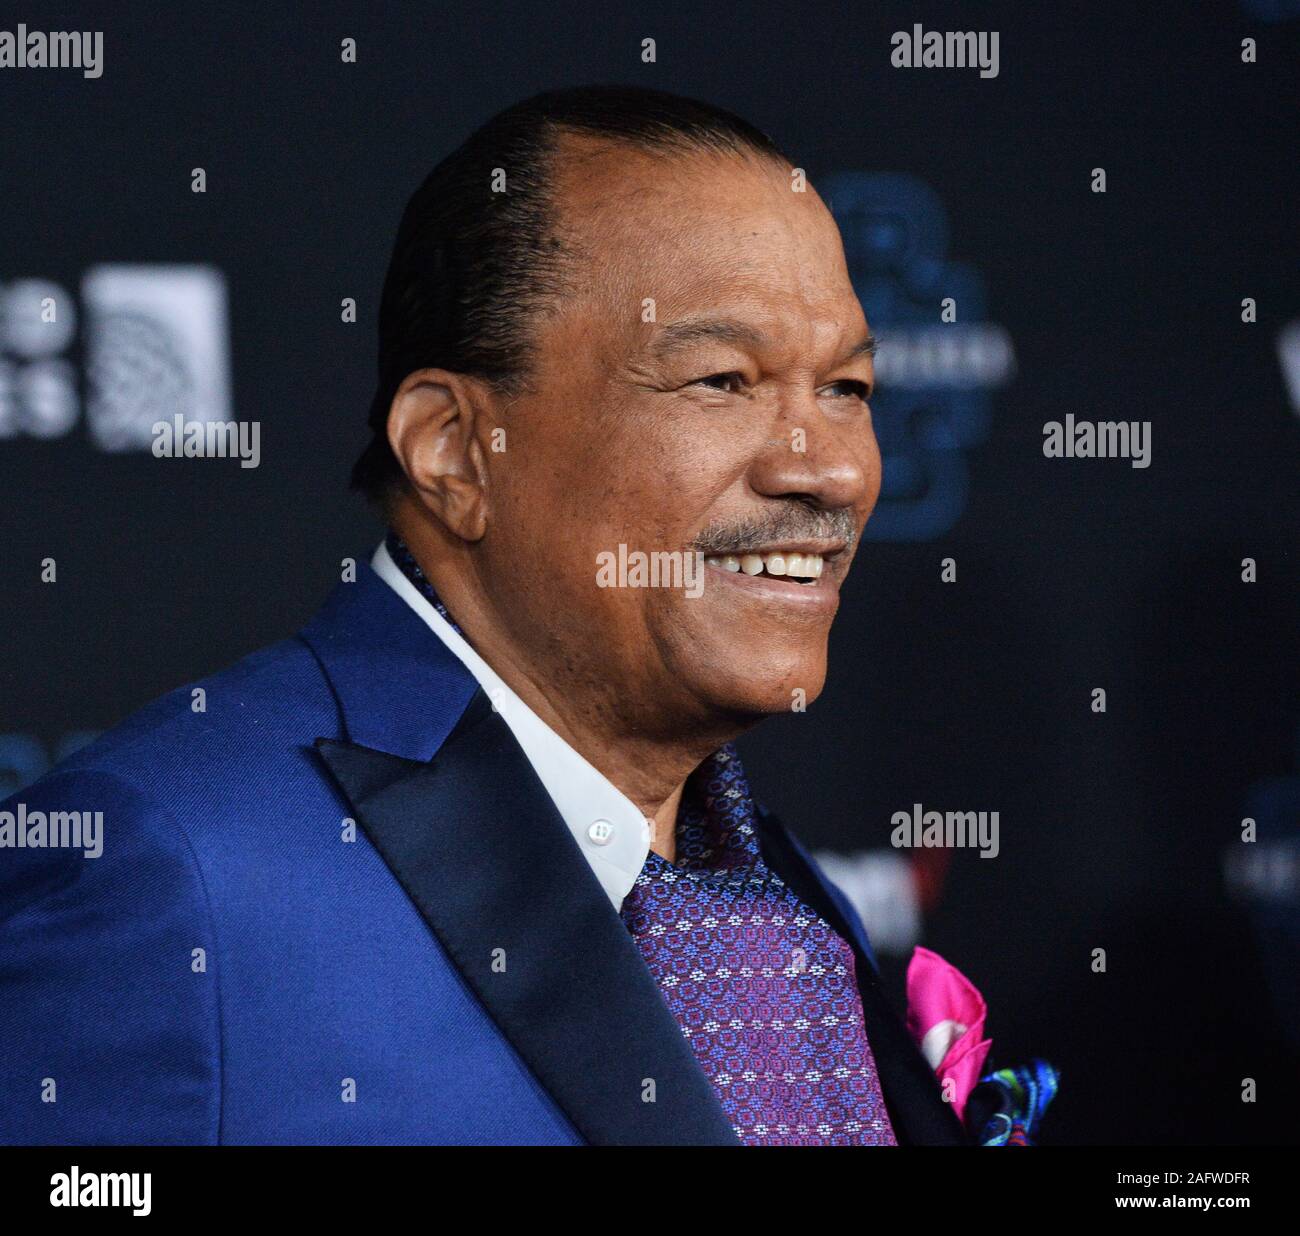 Los Angeles, United States. 17th Dec, 2019. Cast member Billy Dee Williams attends the premiere the motion picture sci-fi fantasy 'Star Wars: The Rise of Skywalker' at the TCL Chinese Theatre in the Hollywood section of Los Angeles on Monday, December 16, 2019. Storyline: The surviving Resistance faces the First Order once more in the final chapter of the Skywalker saga. Photo by Jim Ruymen/UPI Credit: UPI/Alamy Live News Stock Photo